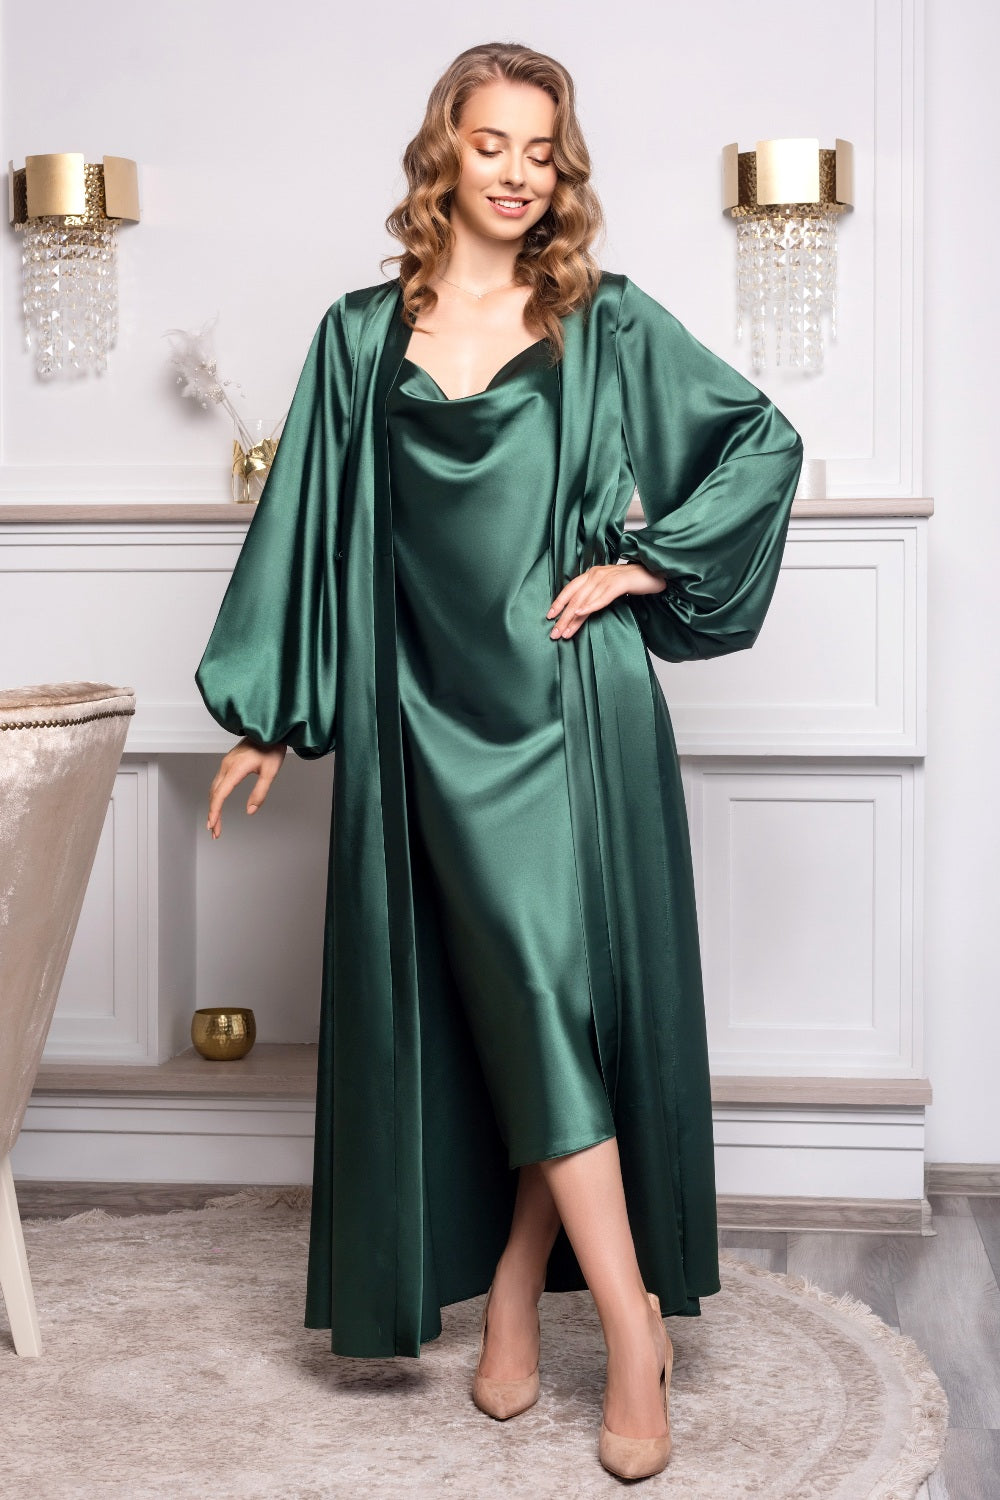 Wrap yourself in glamour with this stunning green satin nightwear set